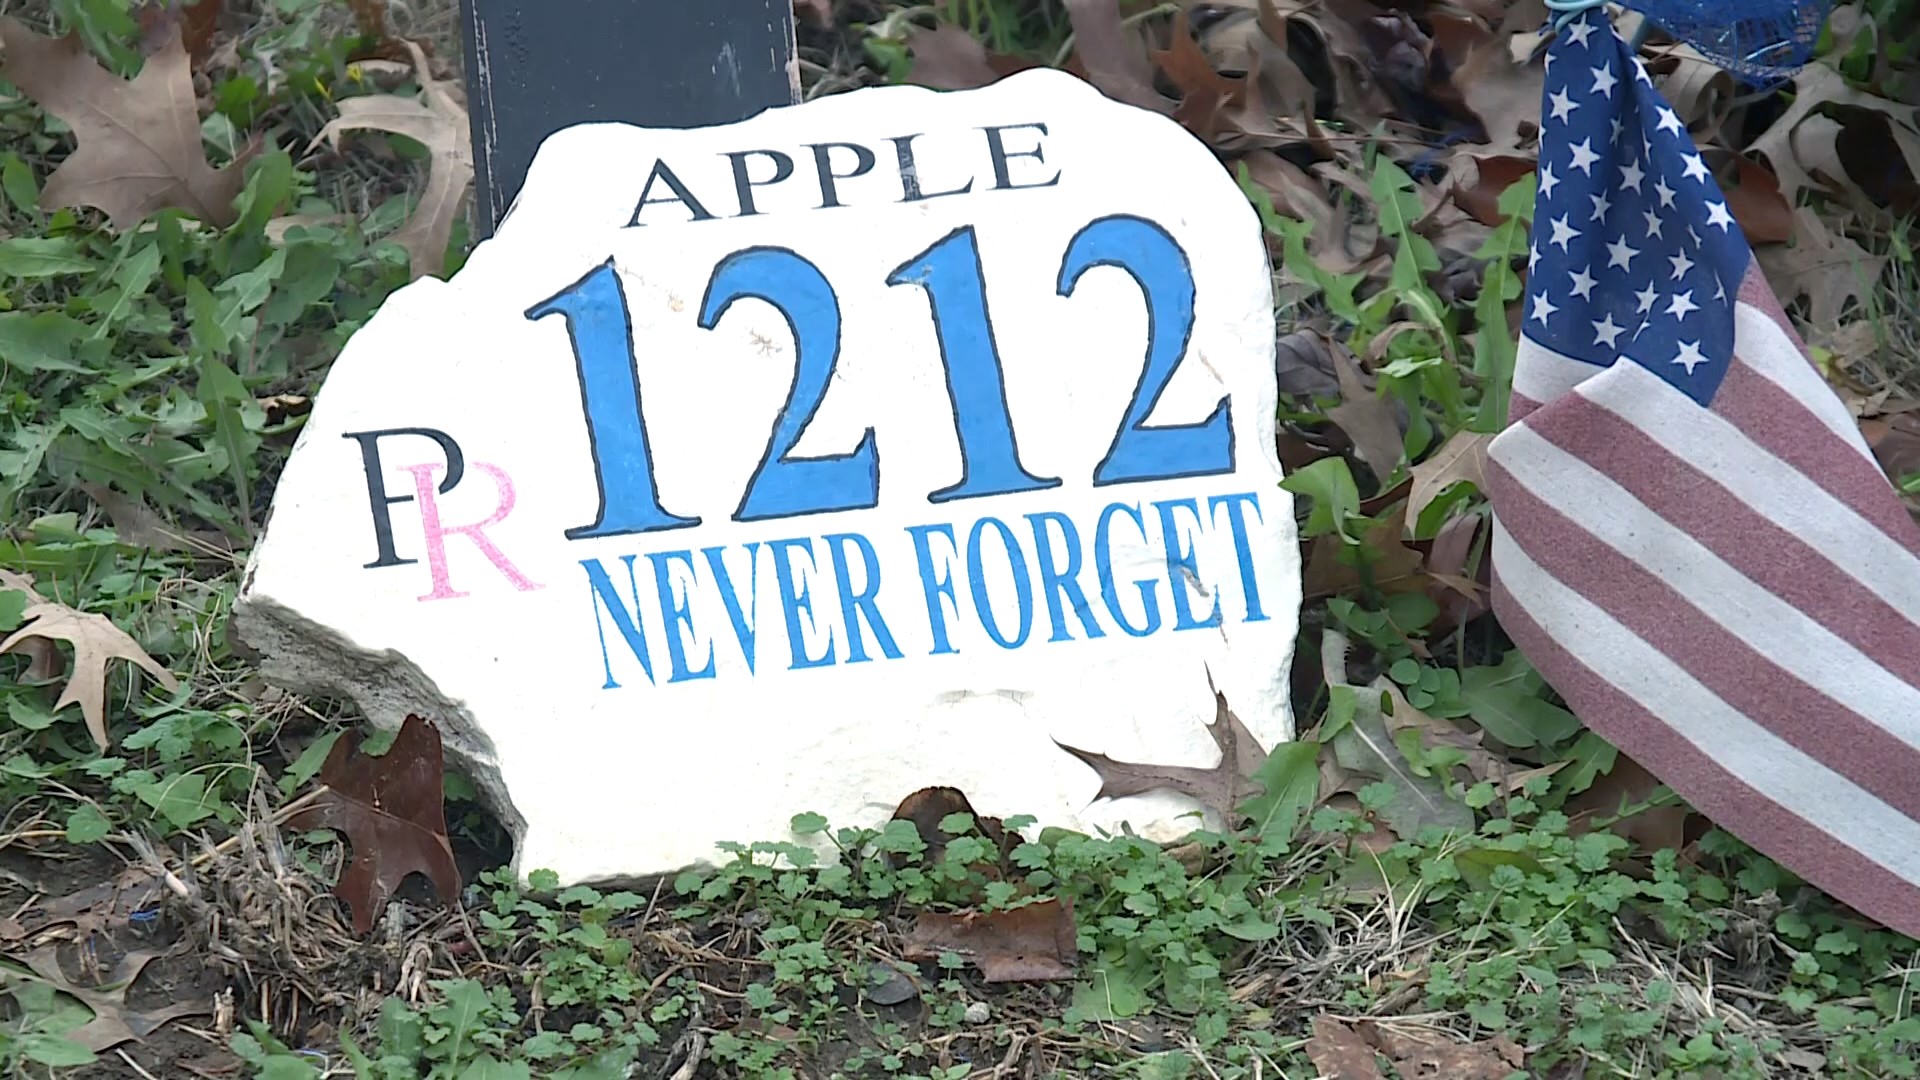 The Pea Ridge community gathered on Officer Kevin Apple Day to commemorate a new memorial in his name.